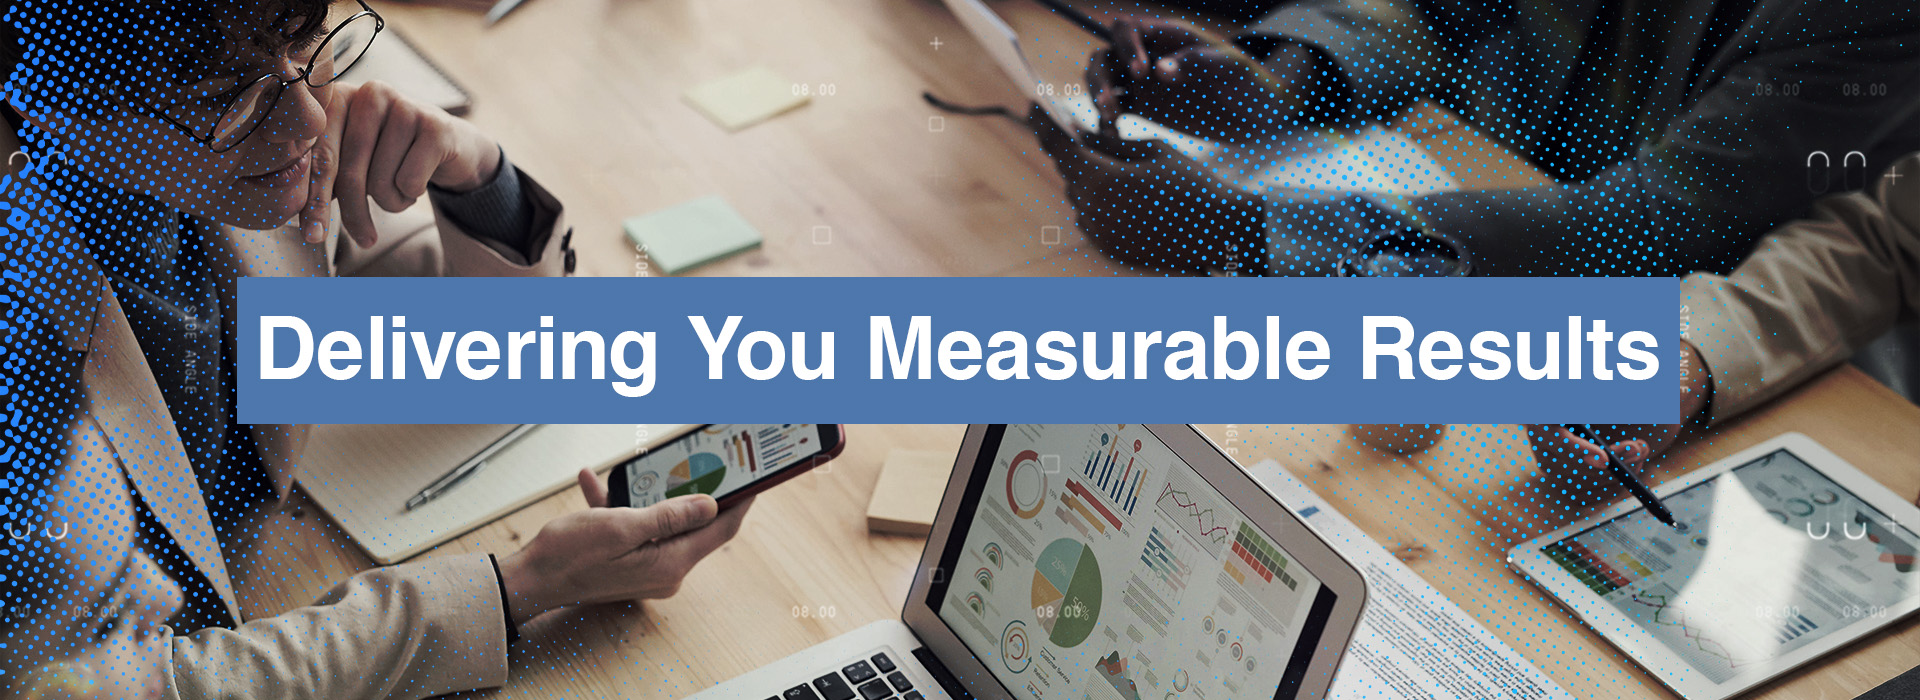 ST Digital Solutions: Delivering You Measurable Results